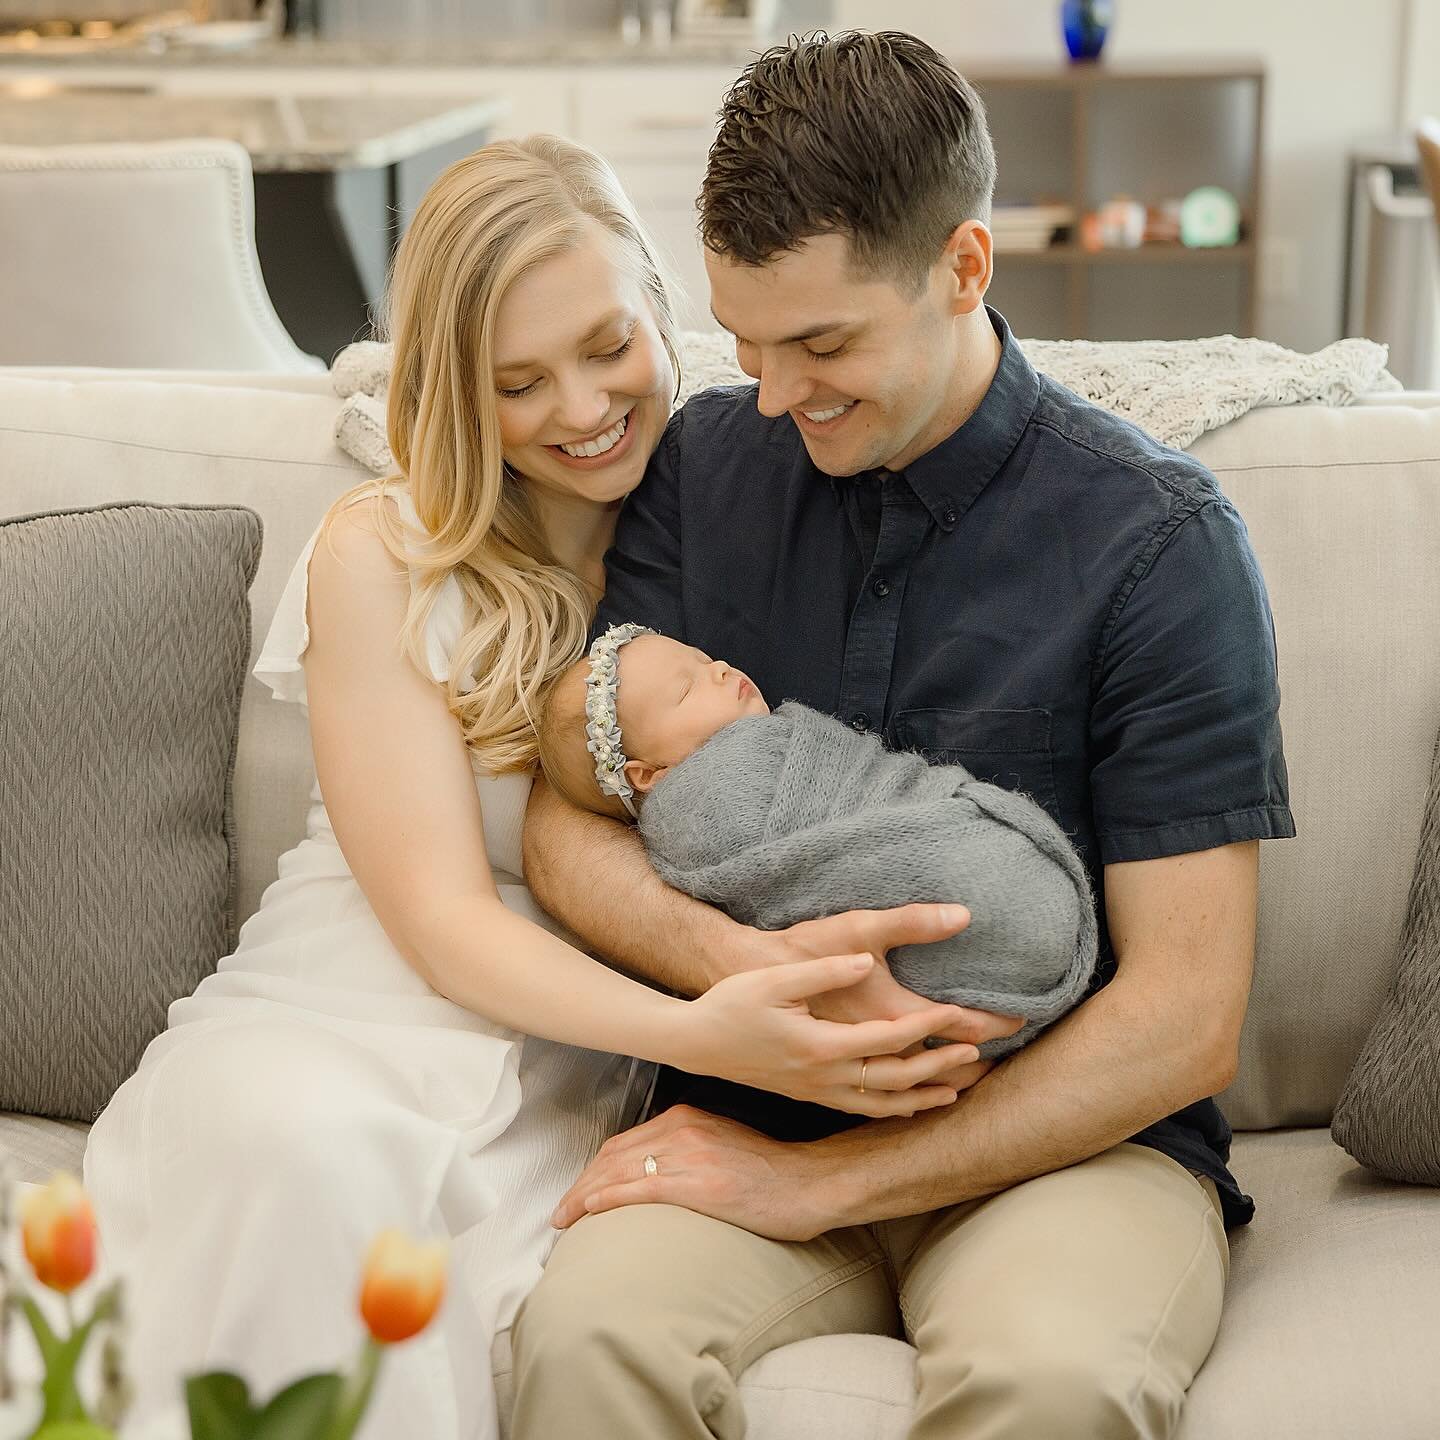 Ruth ♡

Love this sweet in-home Newborn Session! 

Our Newborn Spots are filling up into November 2024!
Send us a message to chat about getting your due date on our calendar-
https://www.husbandandwifephoto.com/newbornsessions

#kansascityphotographe